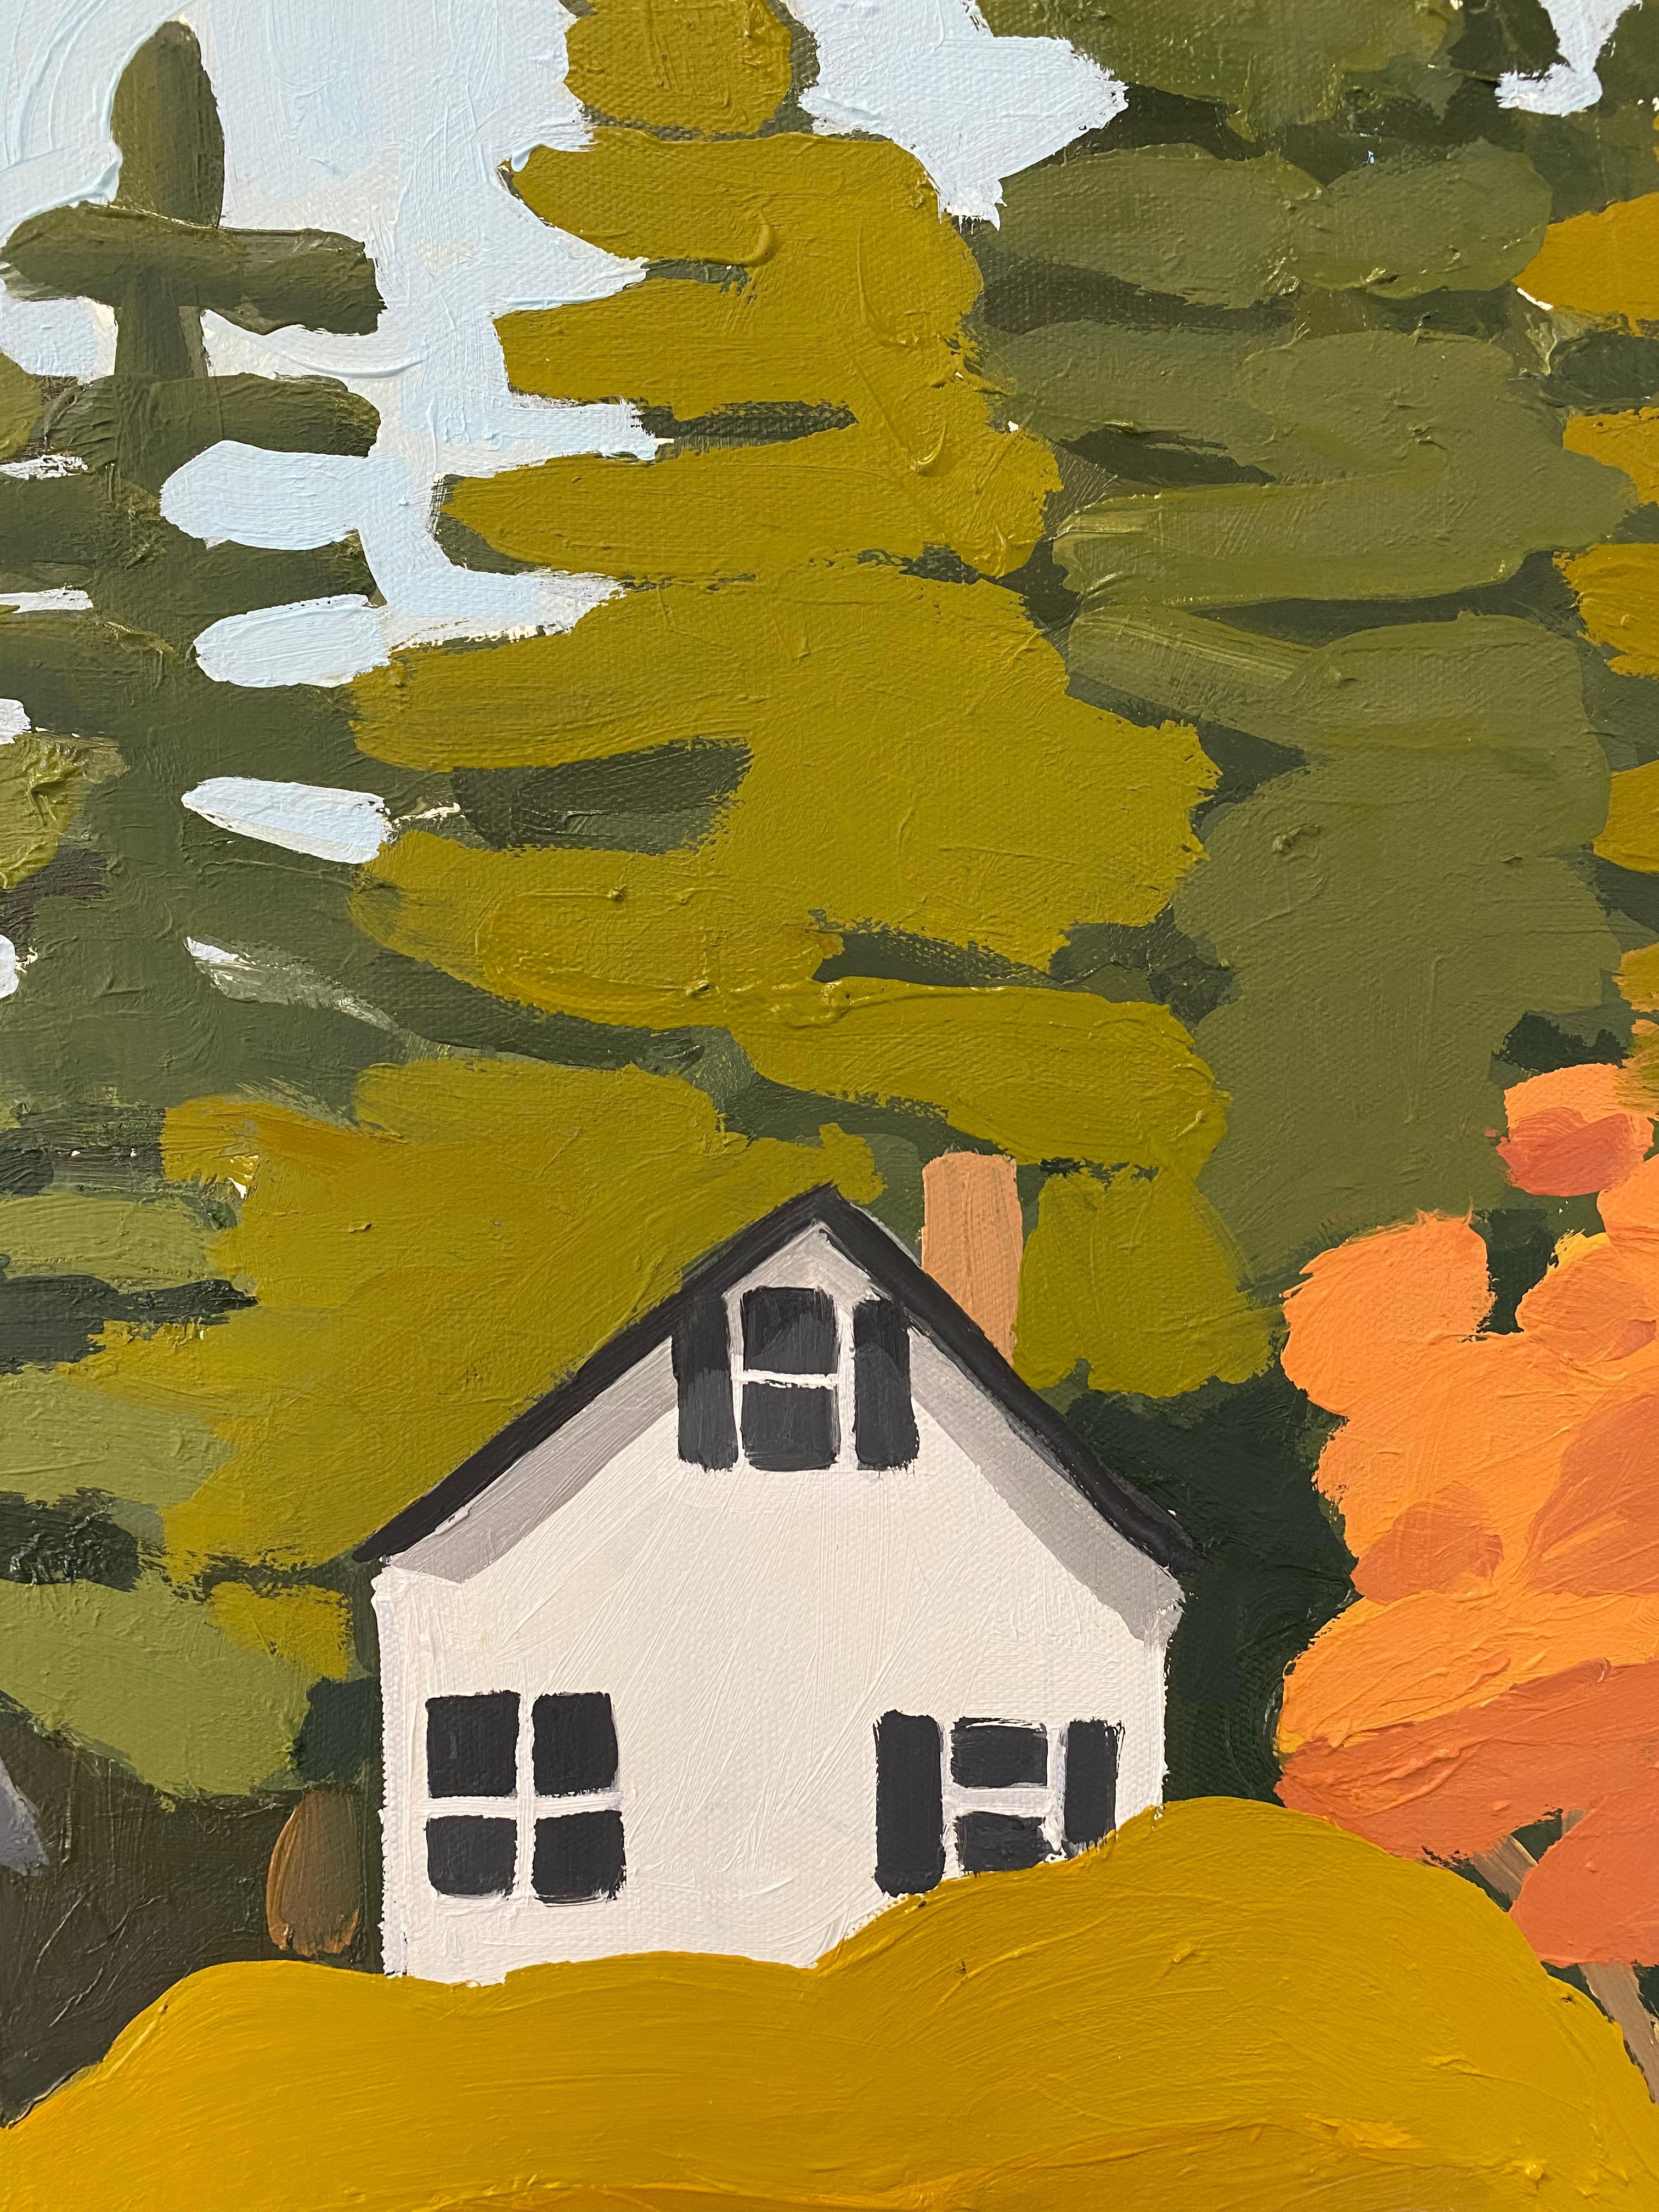 The water's edge along Sheep Island in Maine is beautifully captured in this horizontal oil painting on canvas by Chicago-based artist Sophie Treppendahl. Two white houses, green pine trees and one orange tree can be seen on the island and in the